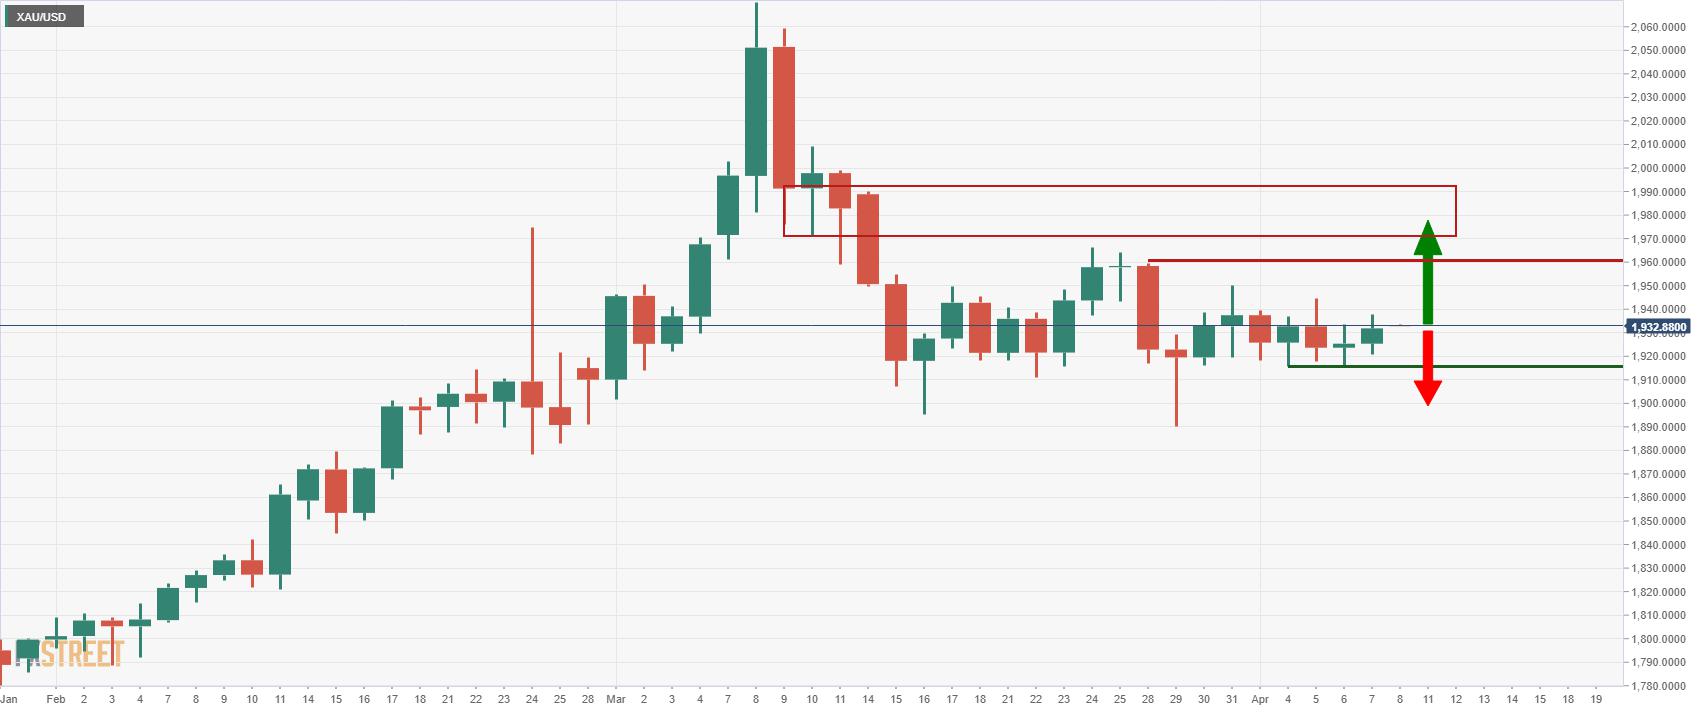 Gold Price Forecast: XAU/USD bulls move in, but have a mountain to climb